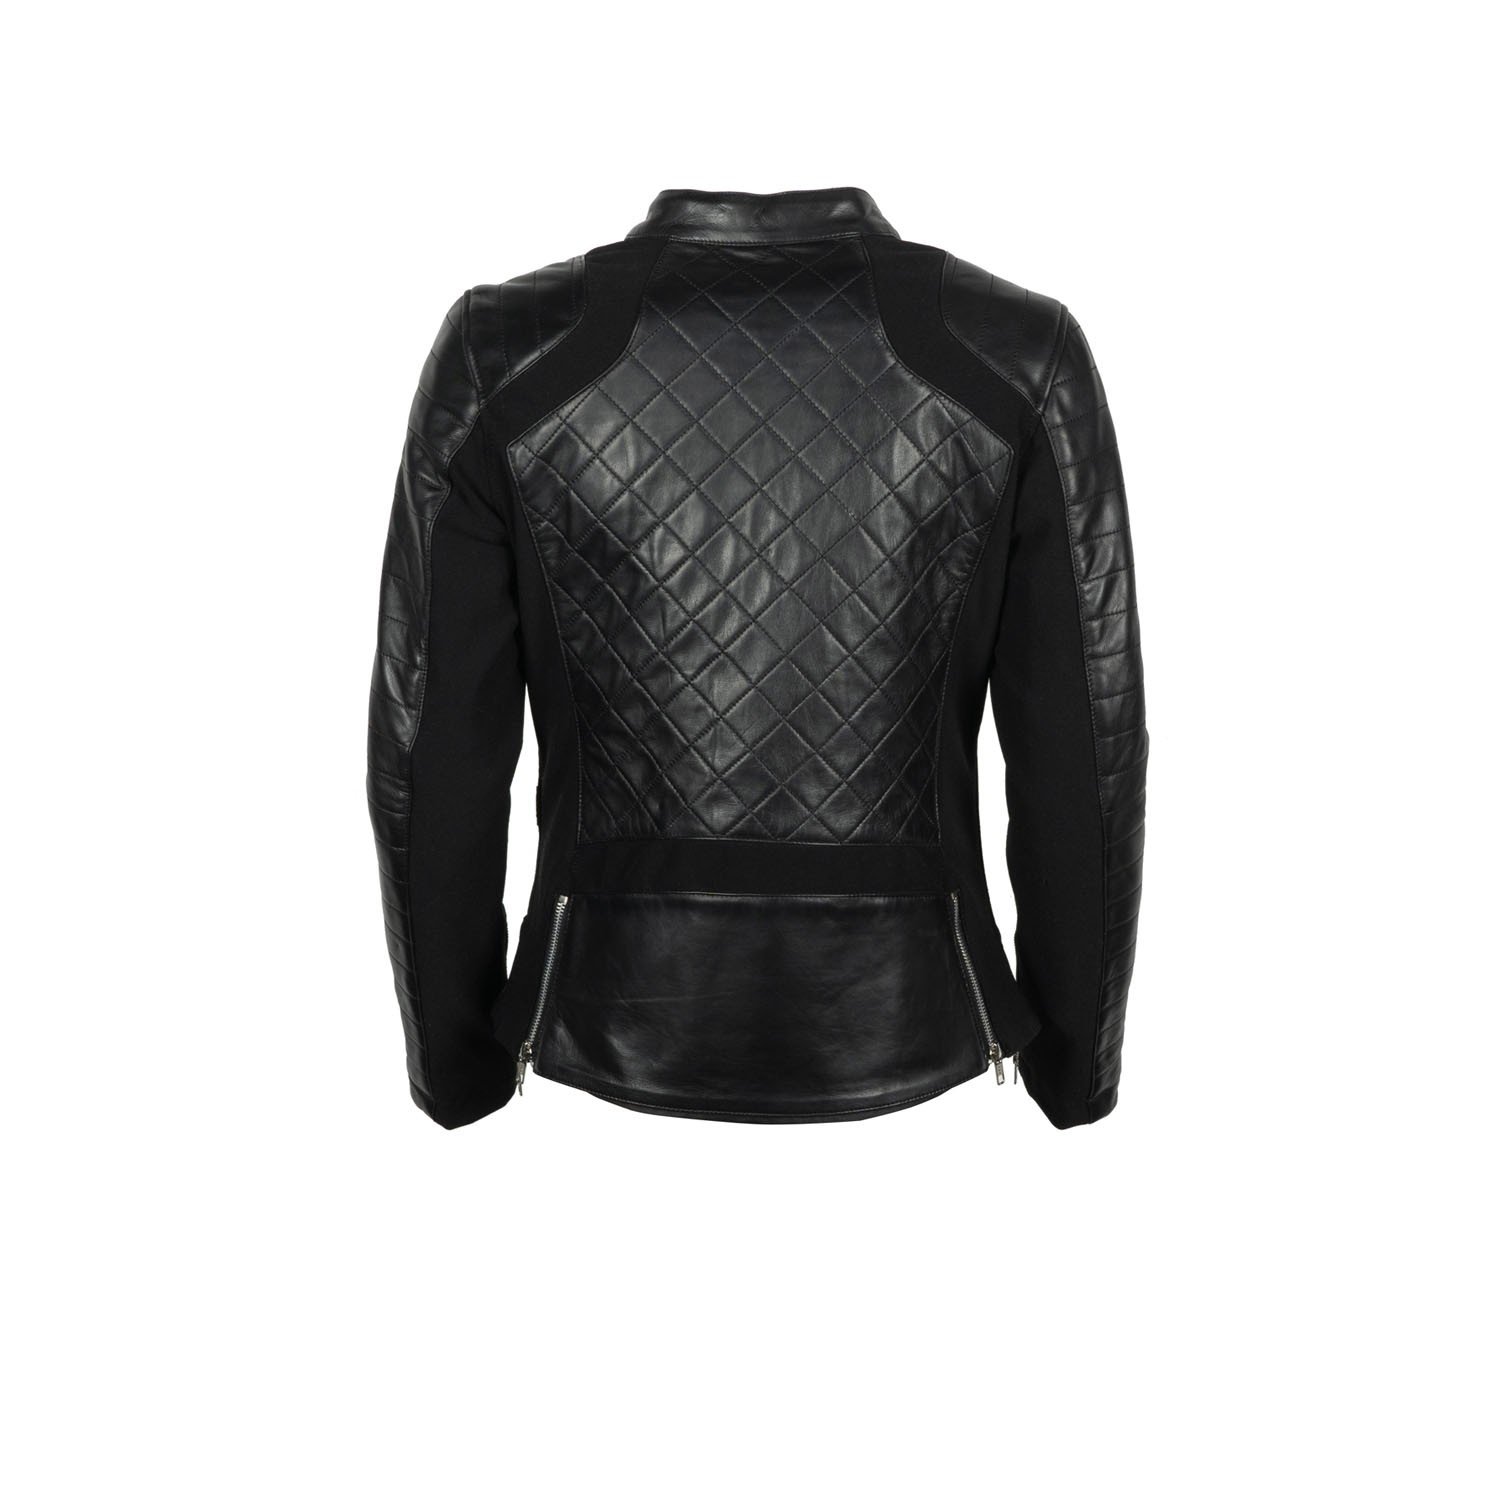 Image of Helstons Kate Leather Soft Stretch Jacket Black Size S ID 3662136085022